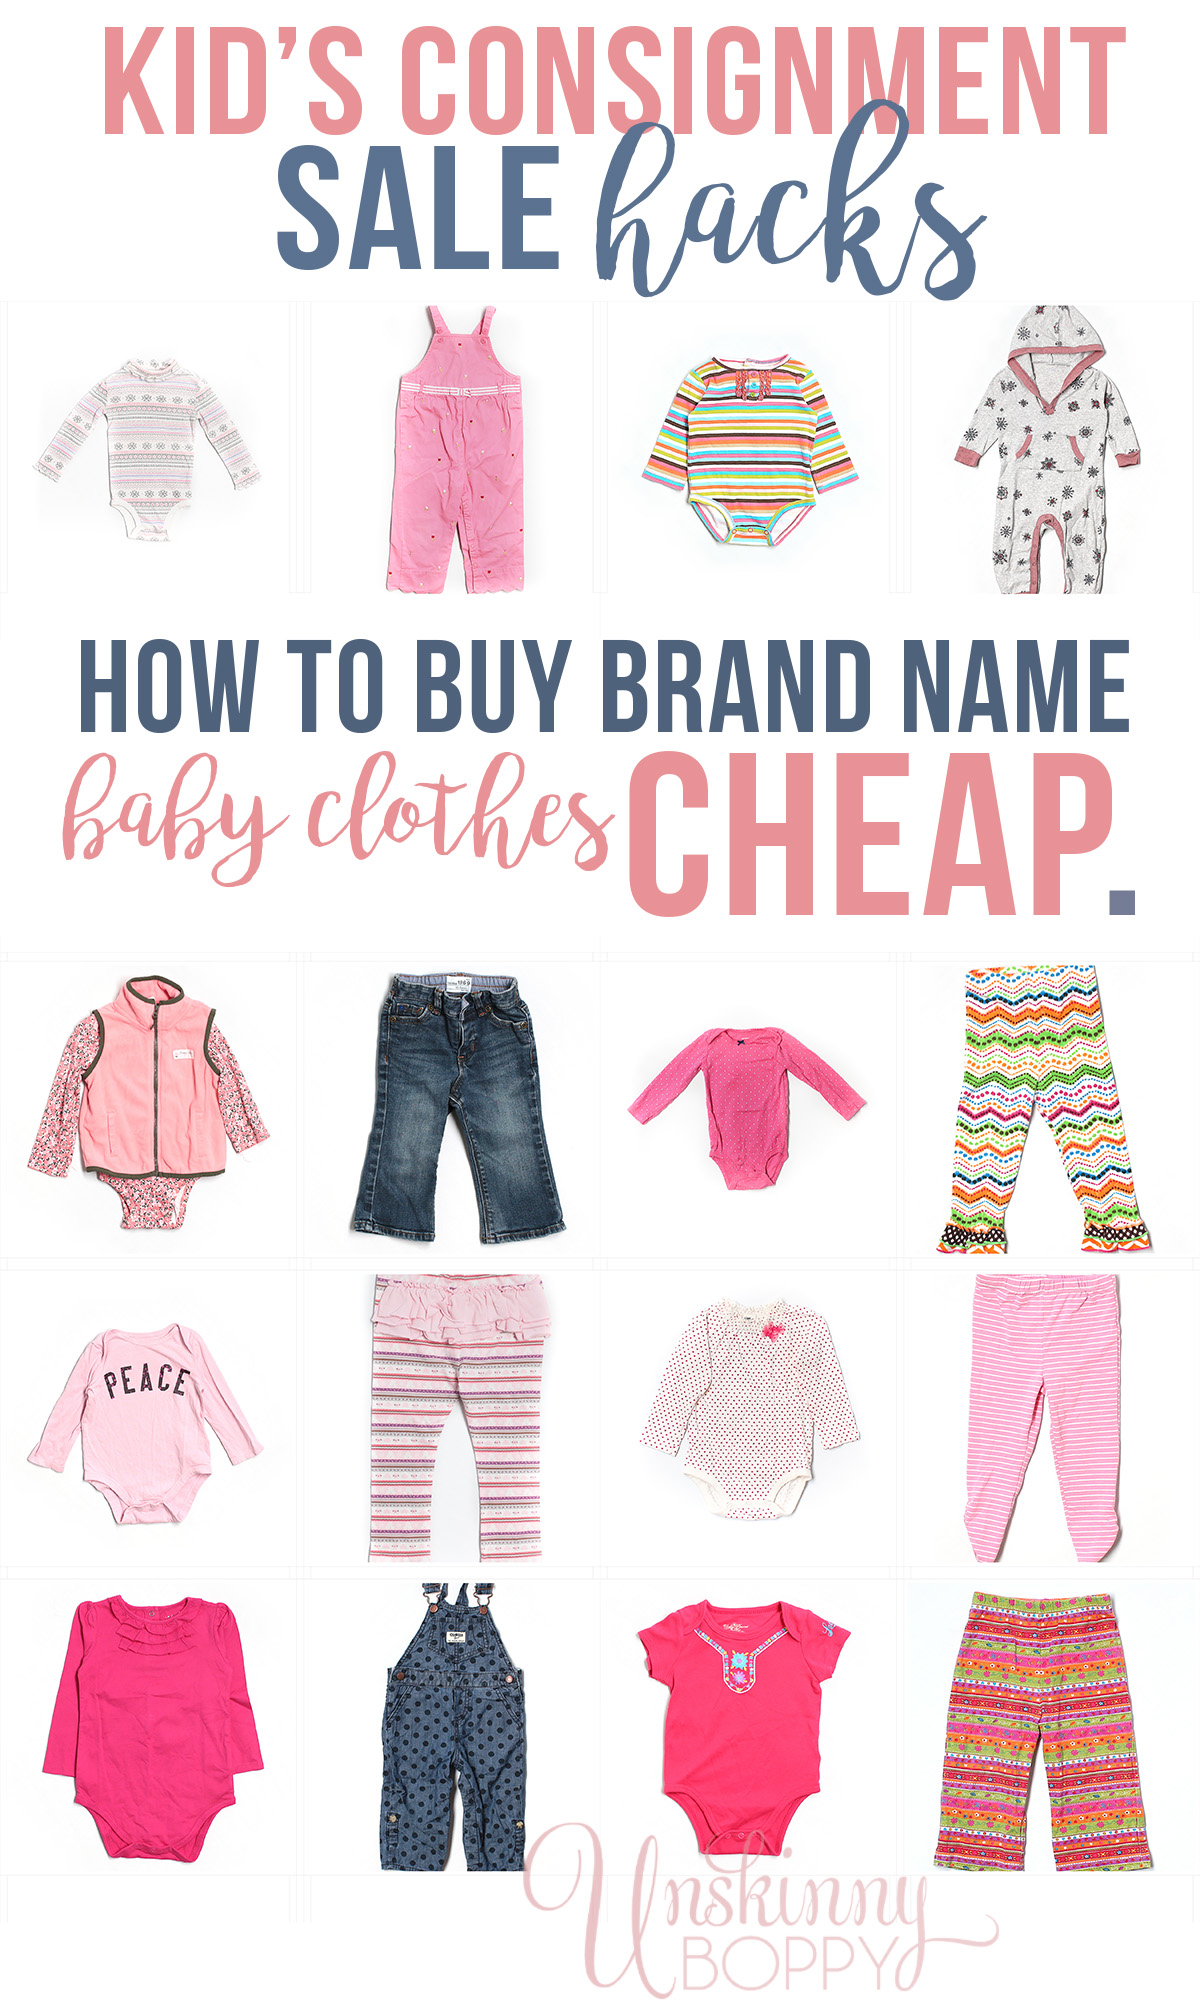 How to Save on Plus Size (and kids!) Clothes - Unskinny Boppy